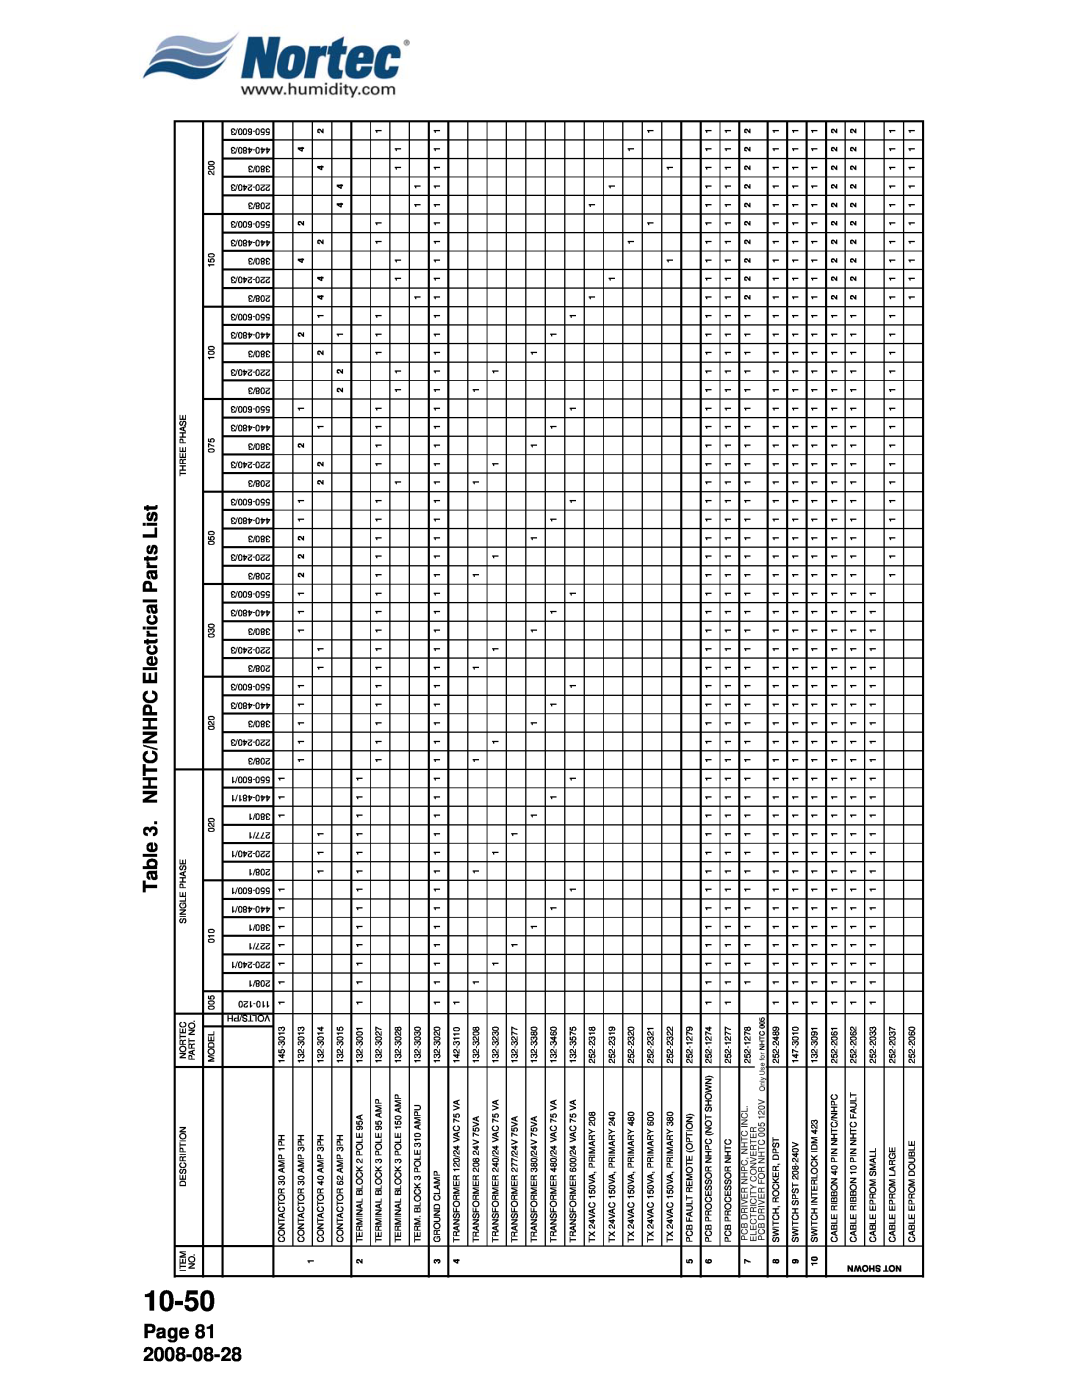 Nortec NH Series installation manual Page 81, NHTC/NHPC Electrical Parts List 